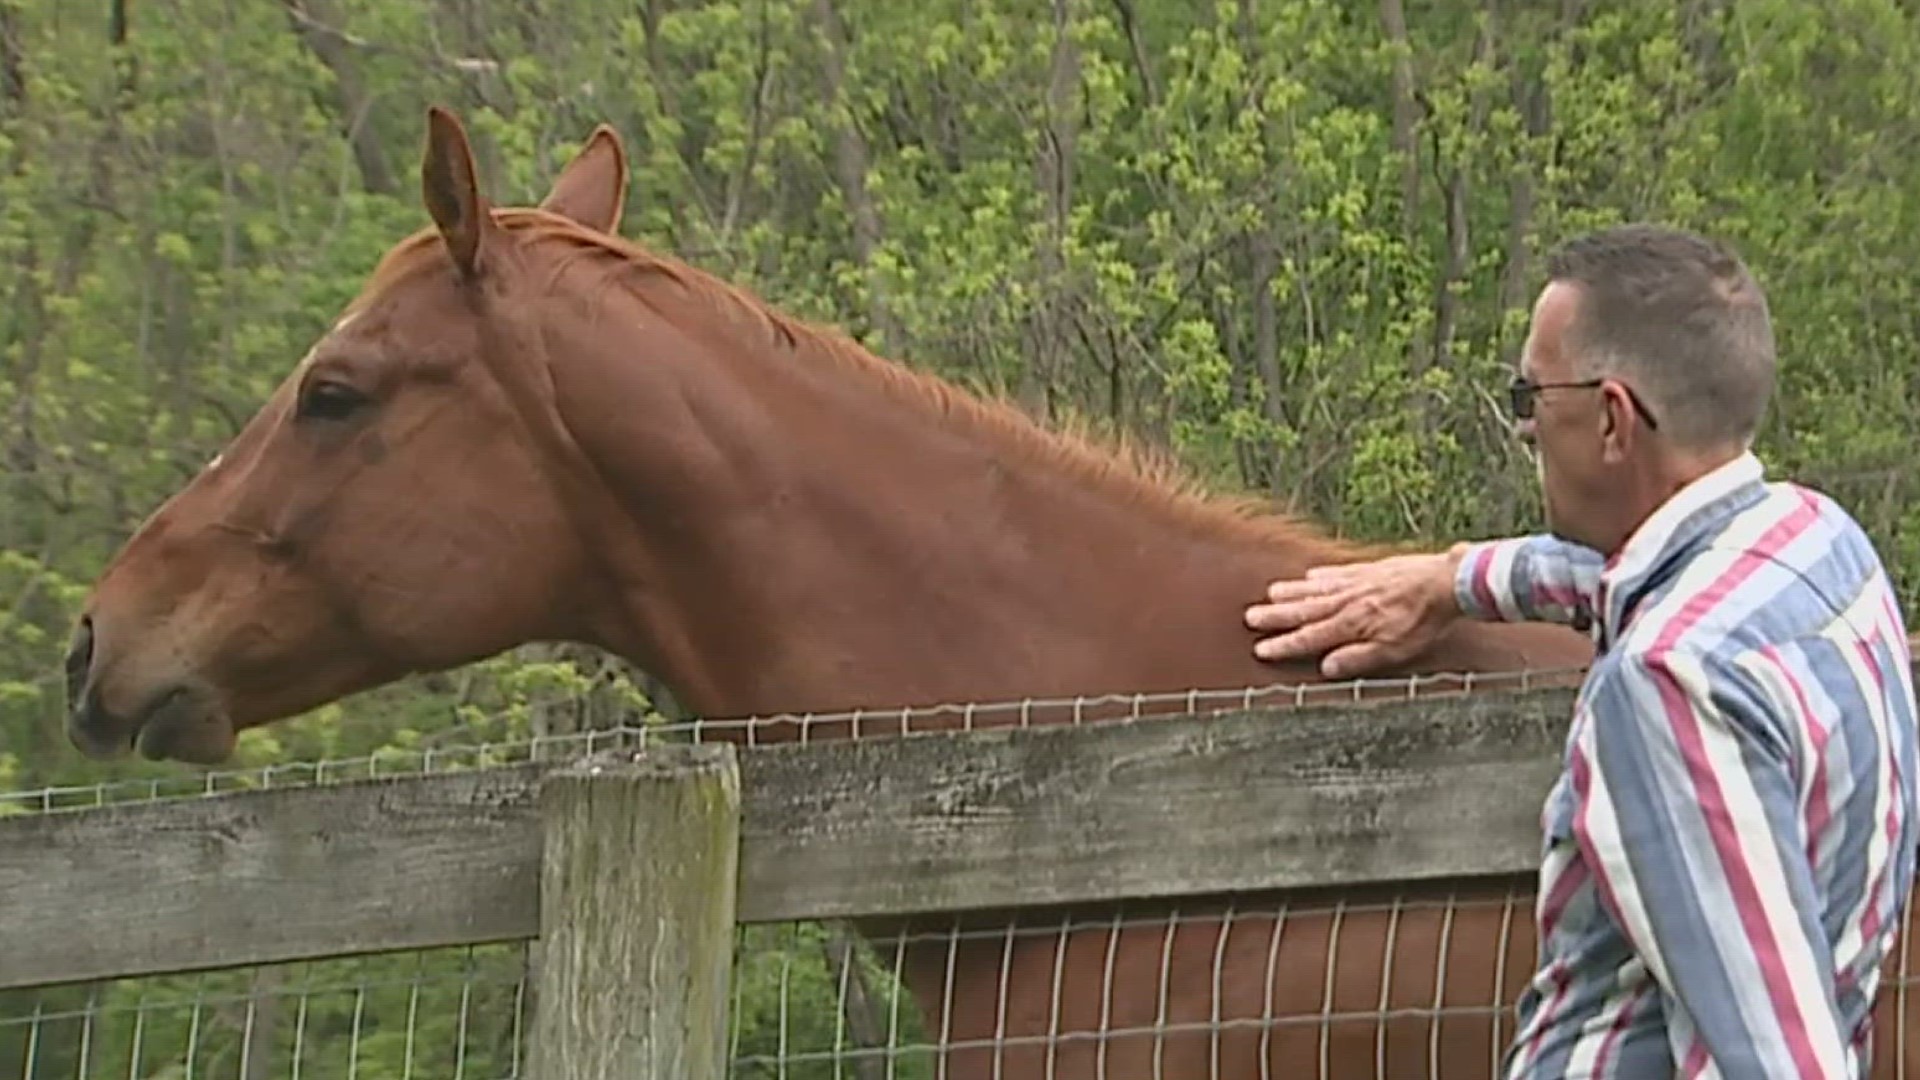 The Building Bridges Foundation is helping veterans heal through horse therapy.